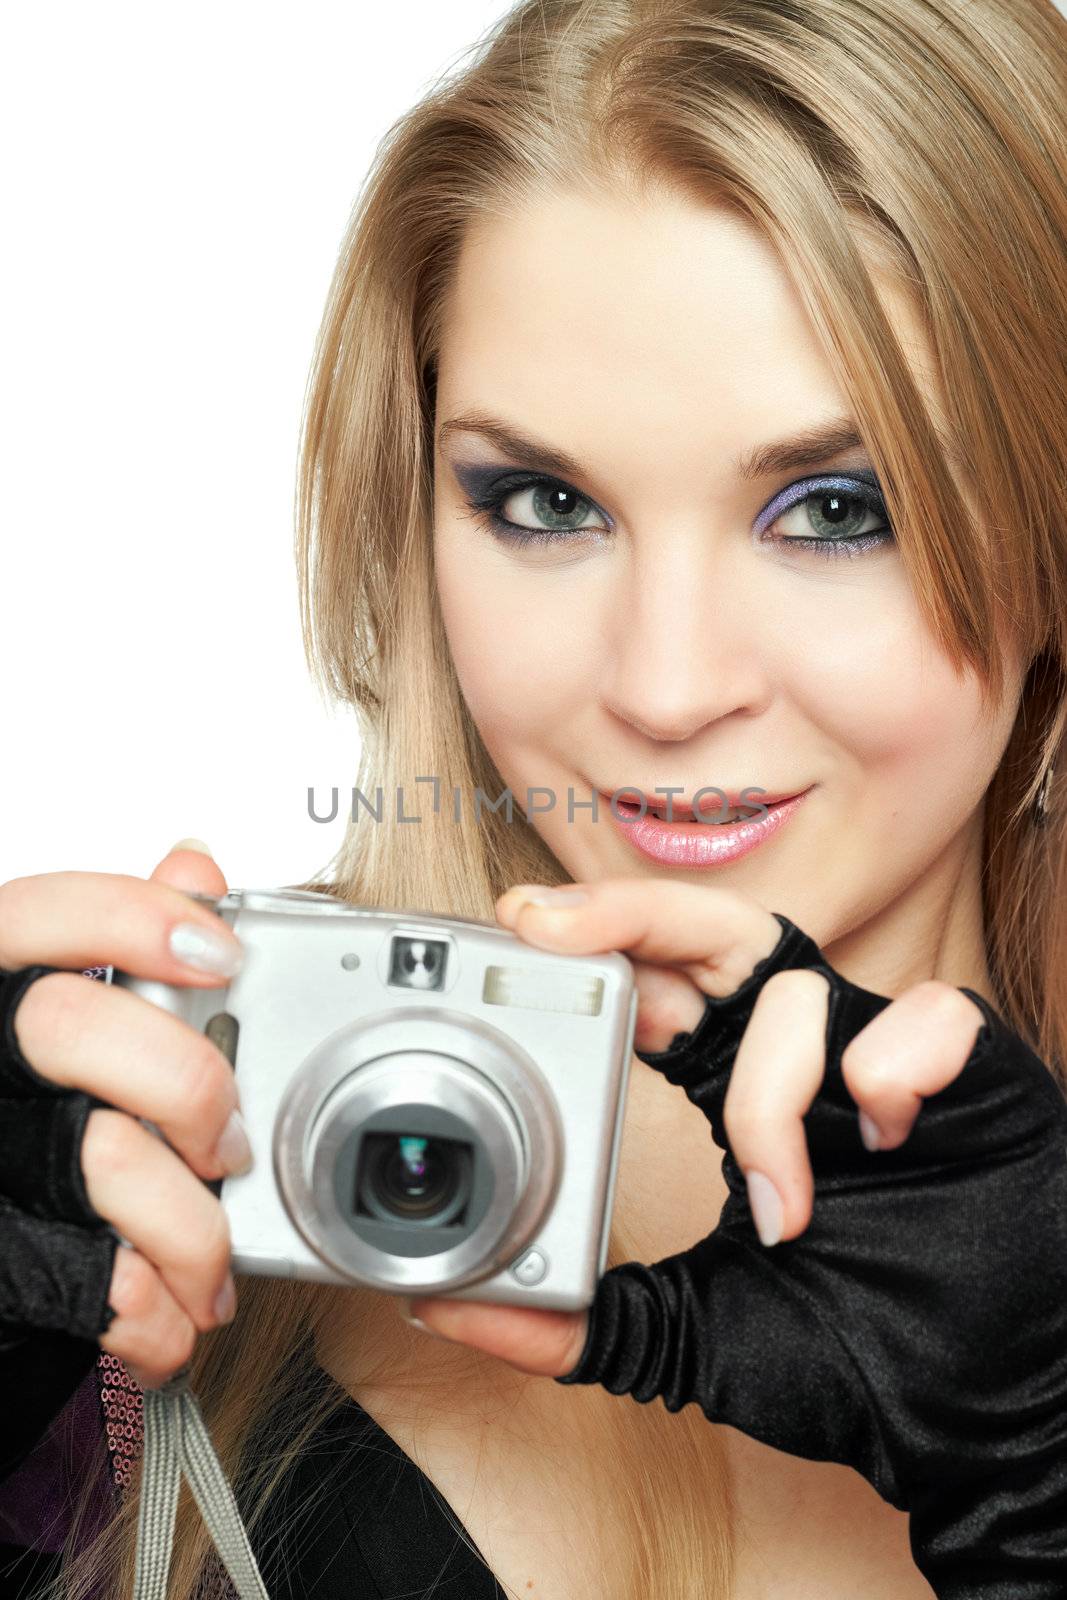 Smiling beautiful woman holding a photo camera by acidgrey